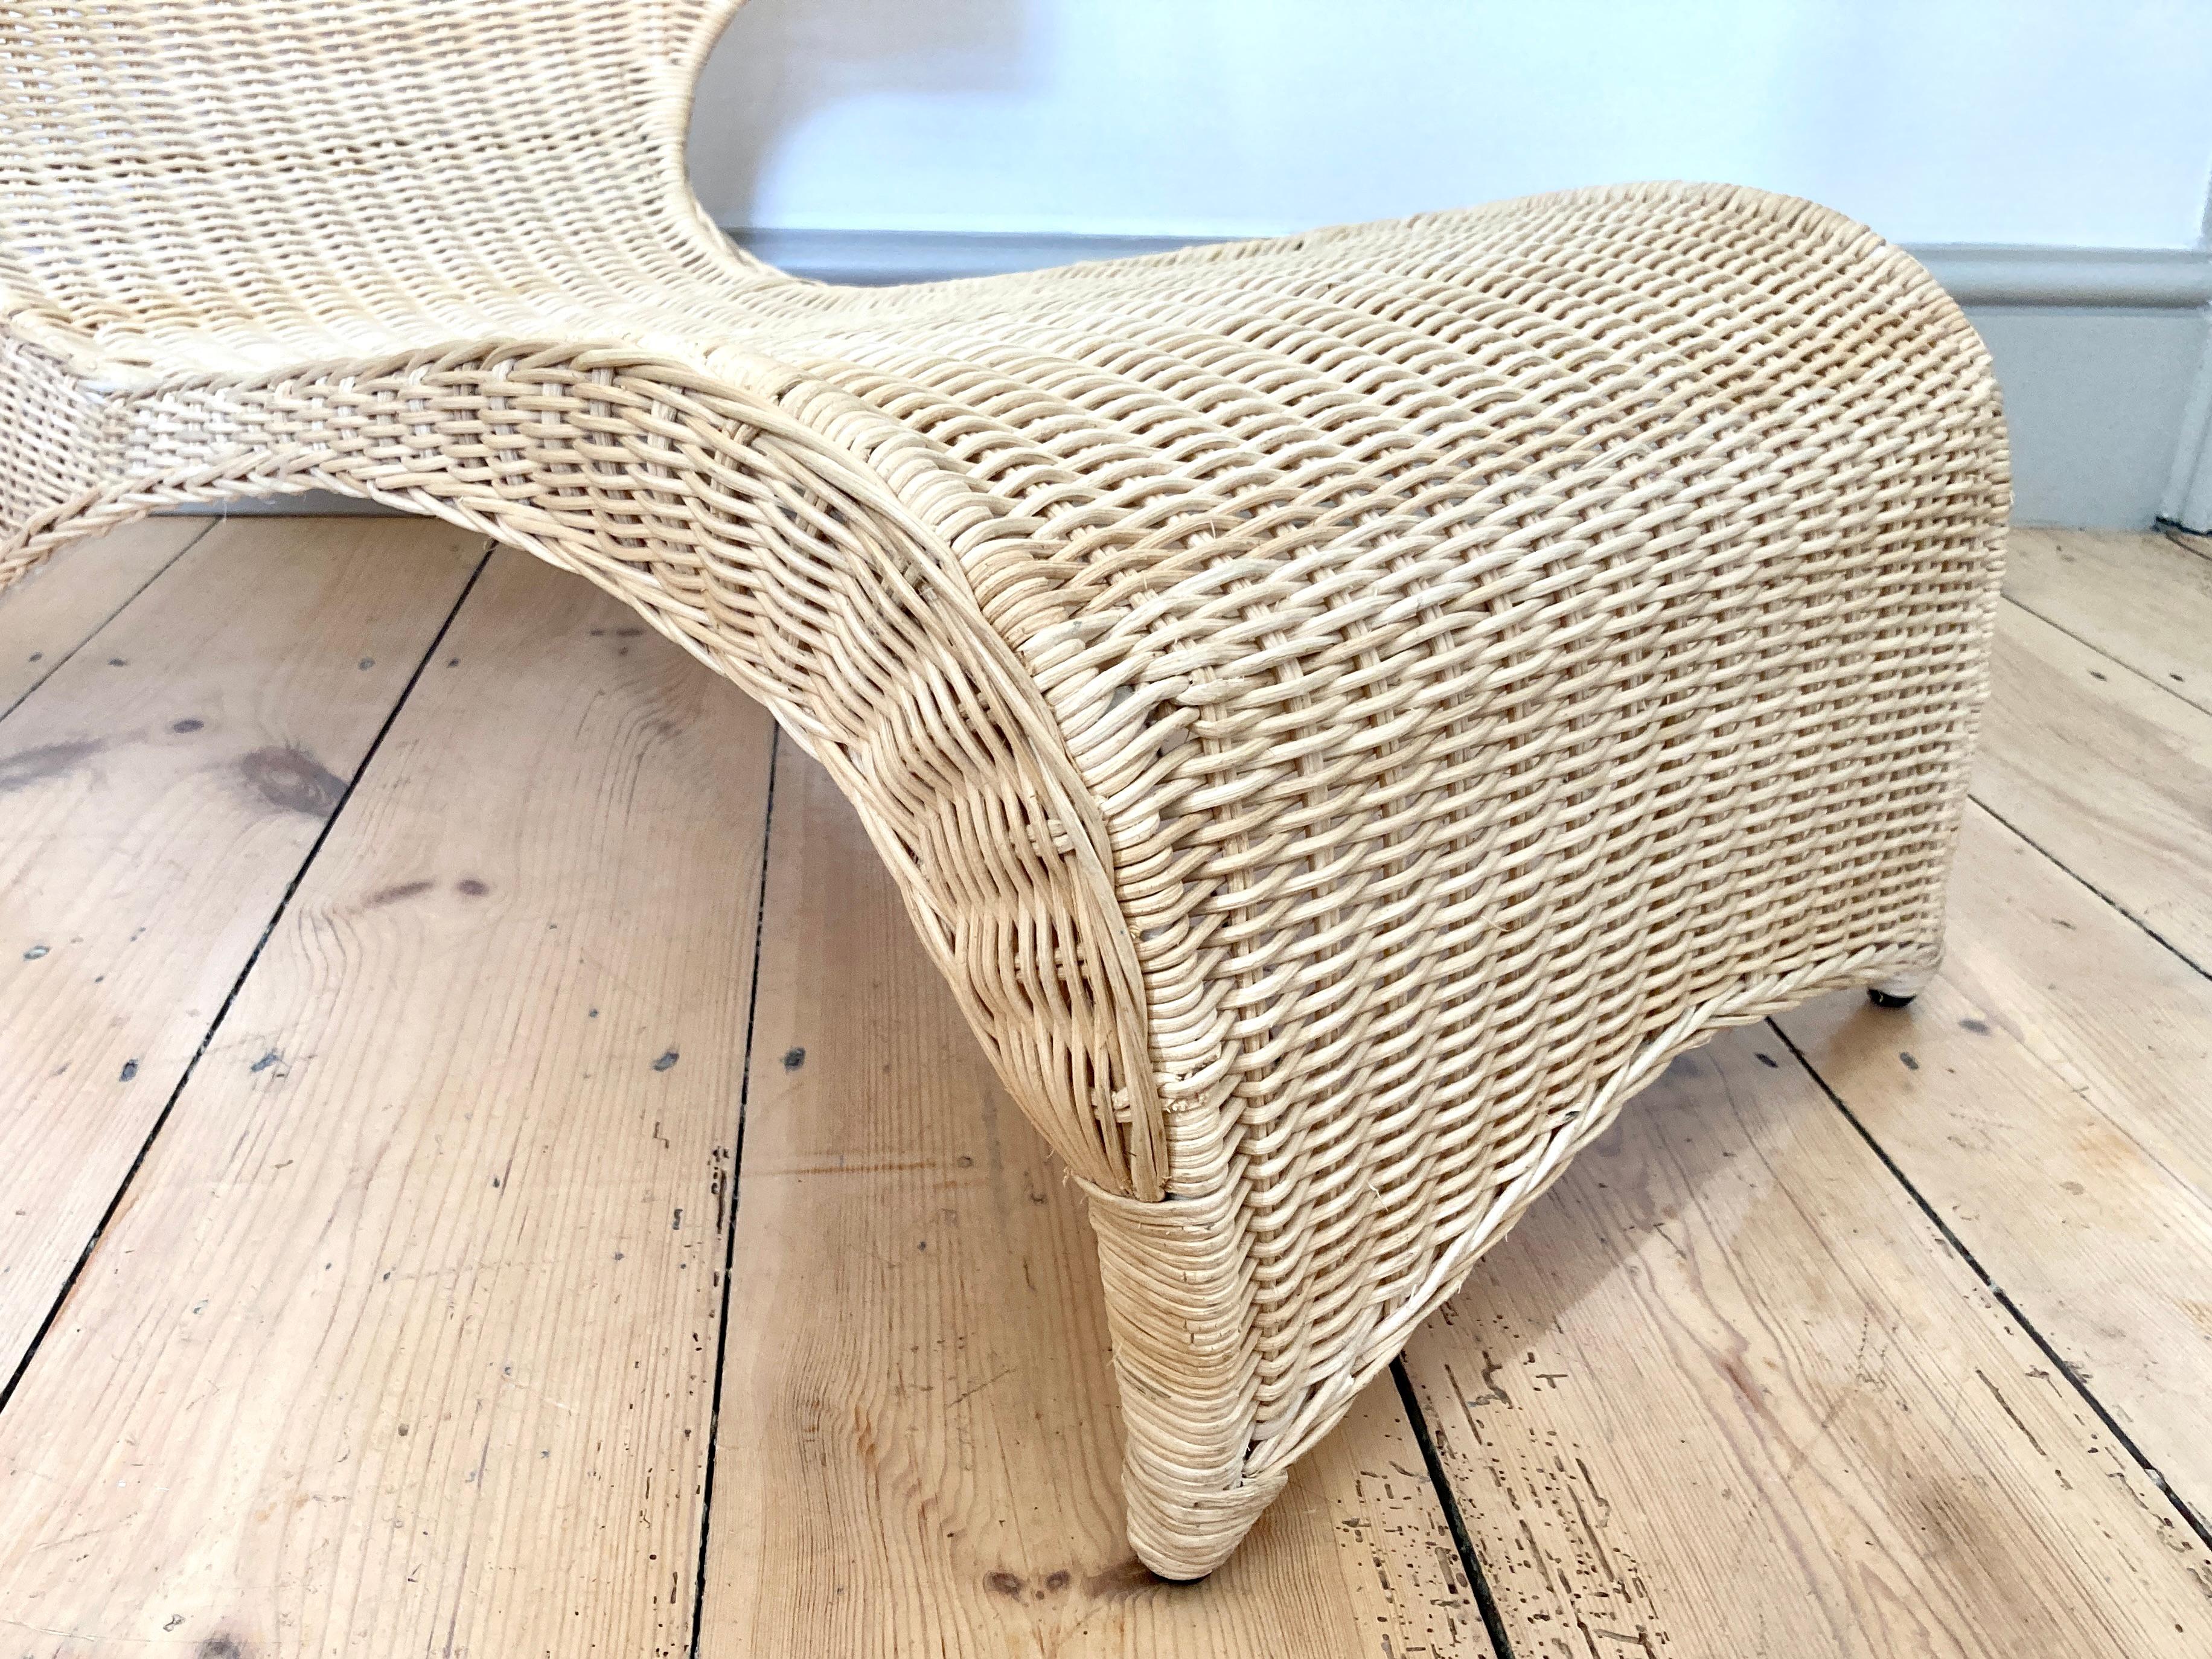 Low Lounge Chair / Chaise Longue by Monika Mulder for Ikea Savo Natural Rattan 4